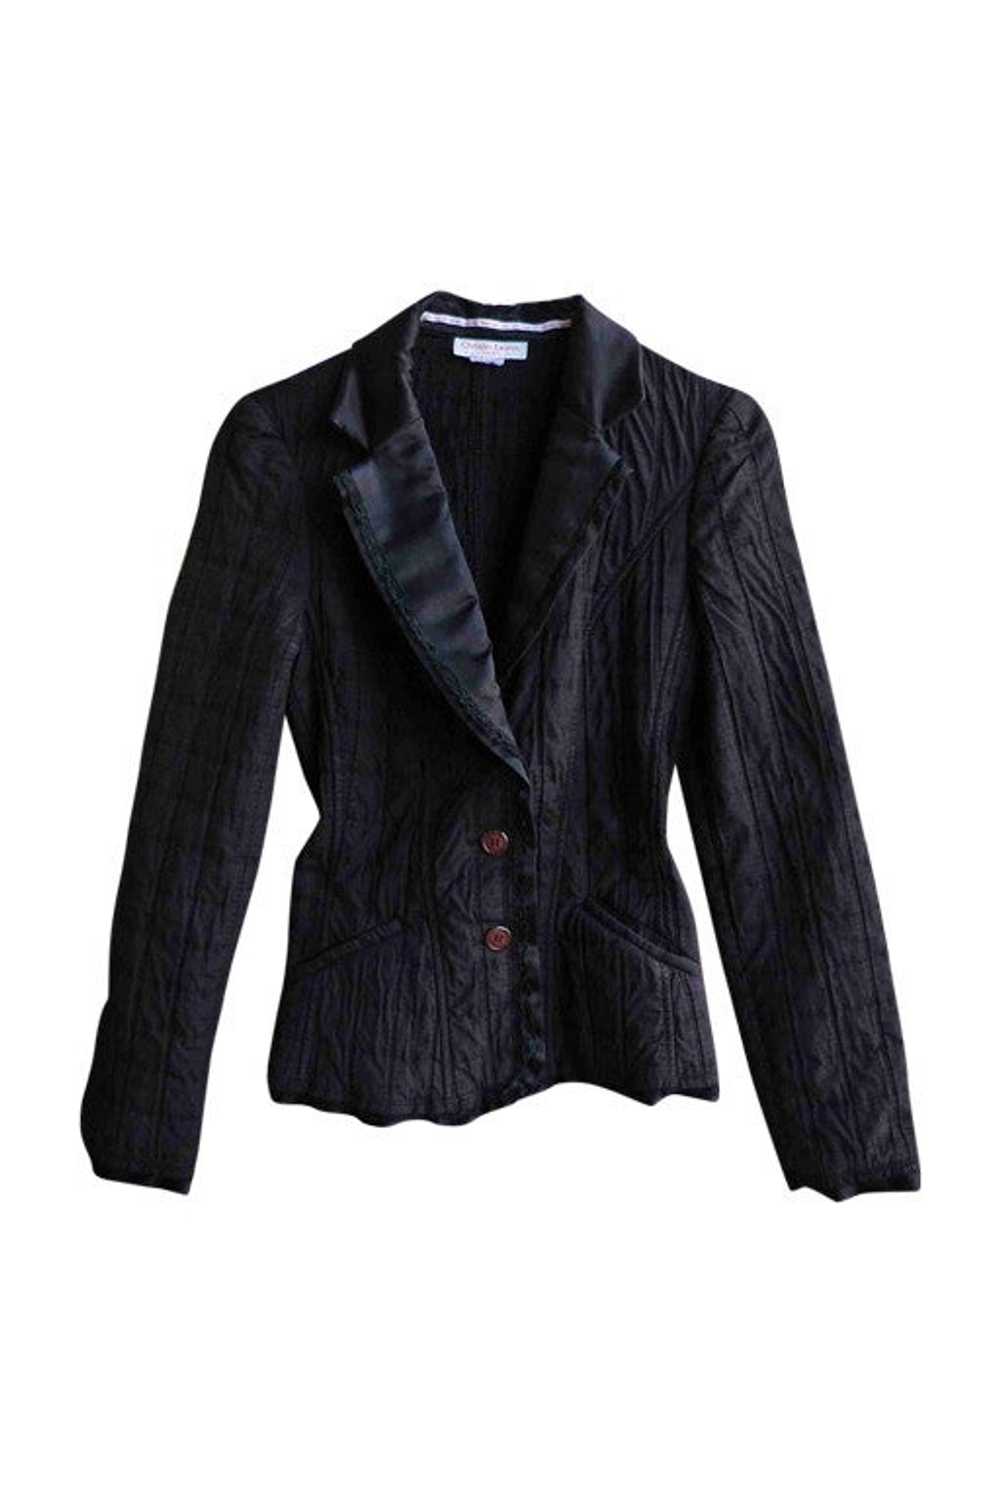 Christian Lacroix quilted blazer - quilted jacket… - image 1